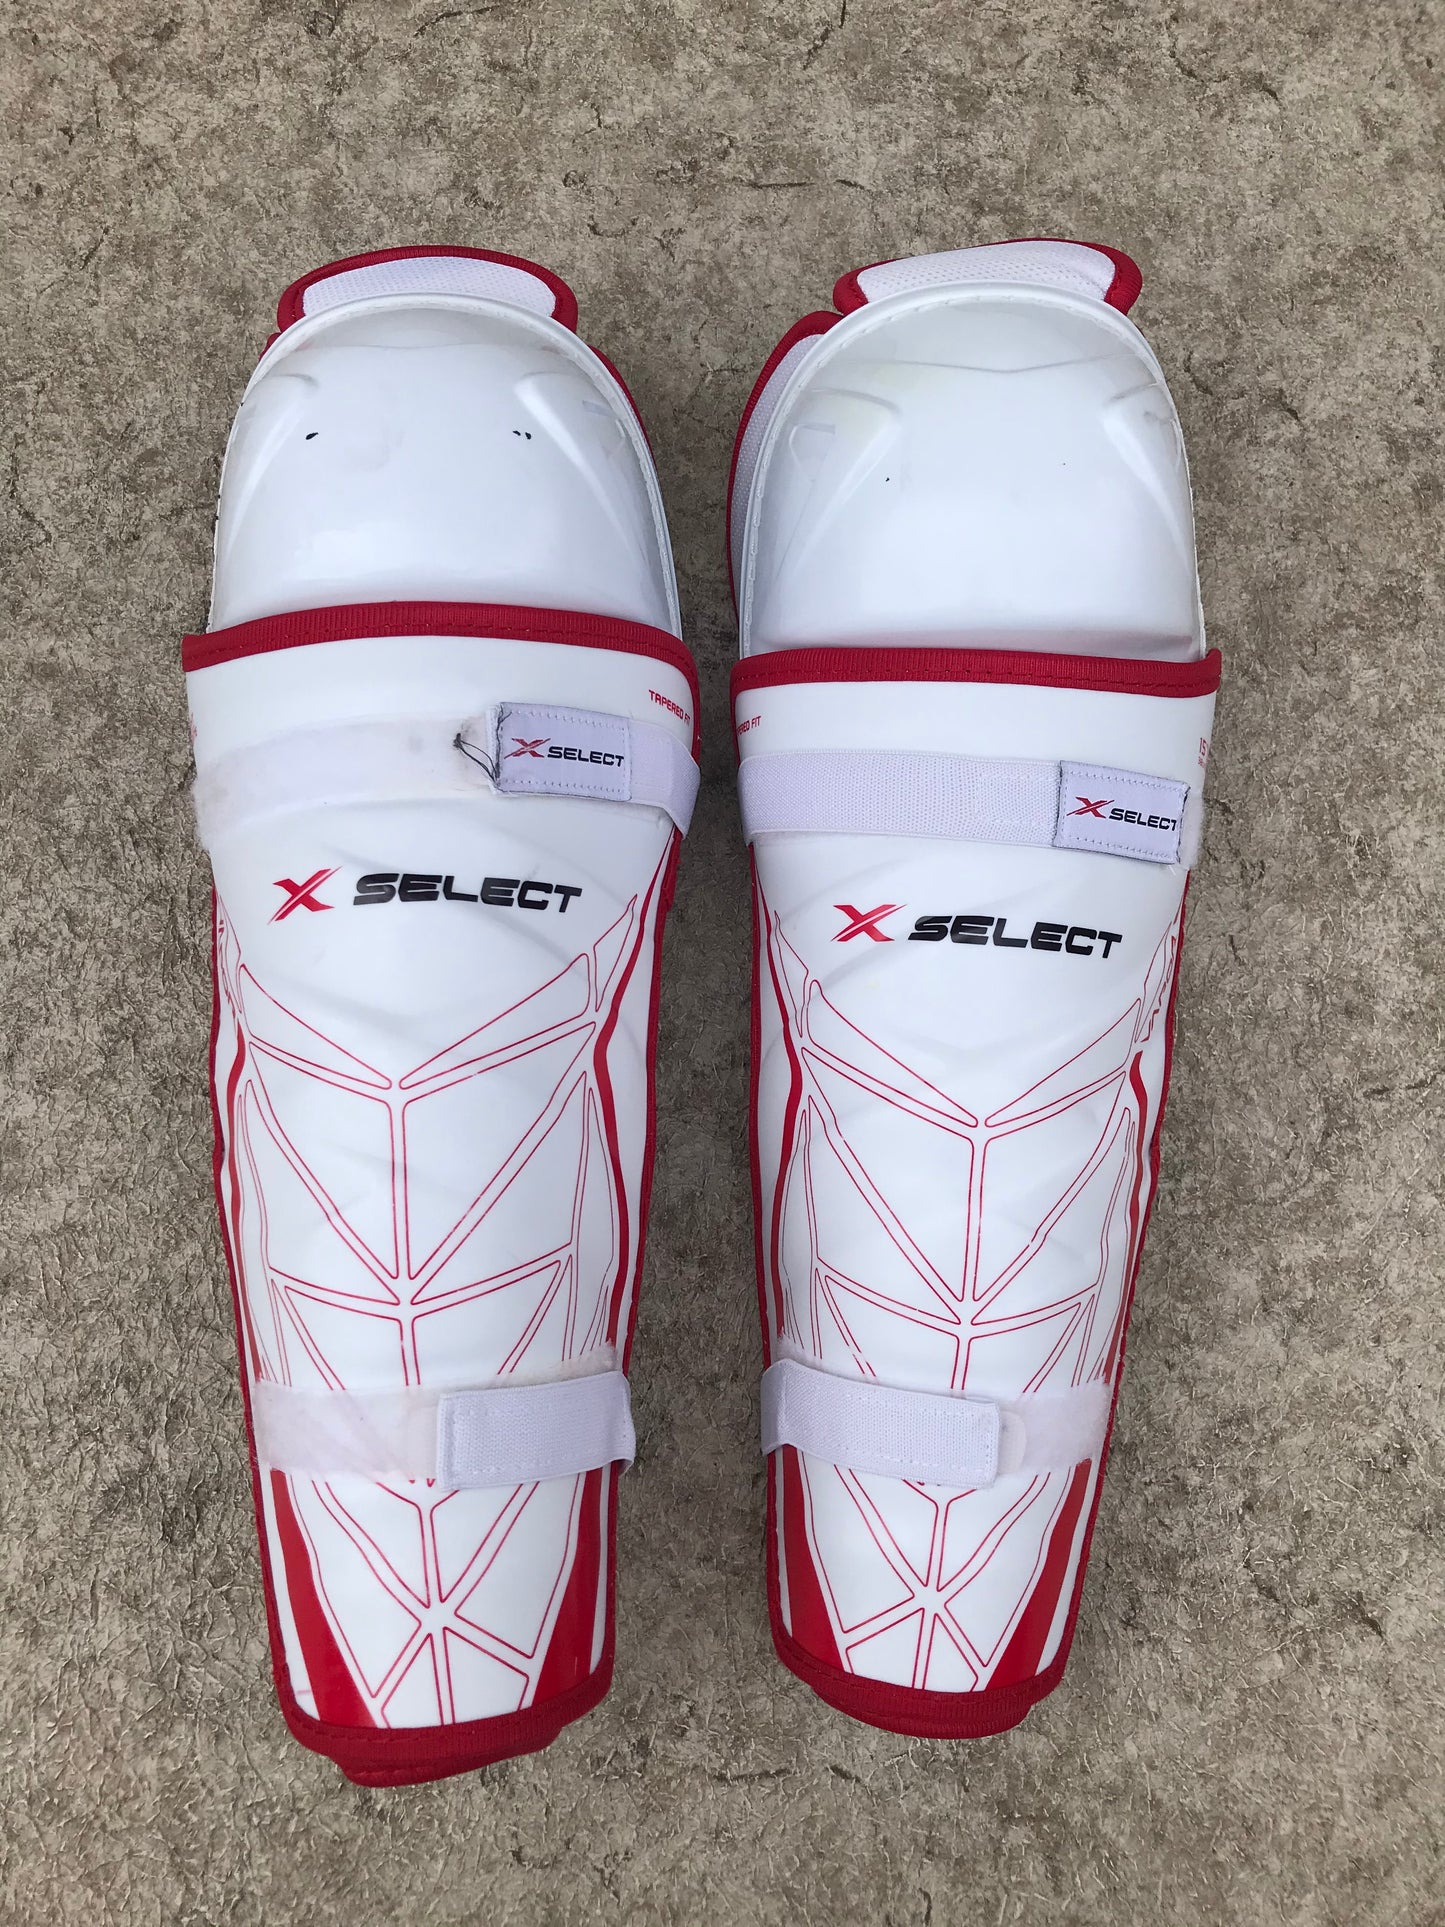 Hockey Shin Pads Men's Size 15 inch White Red Calf Wrap Excellent